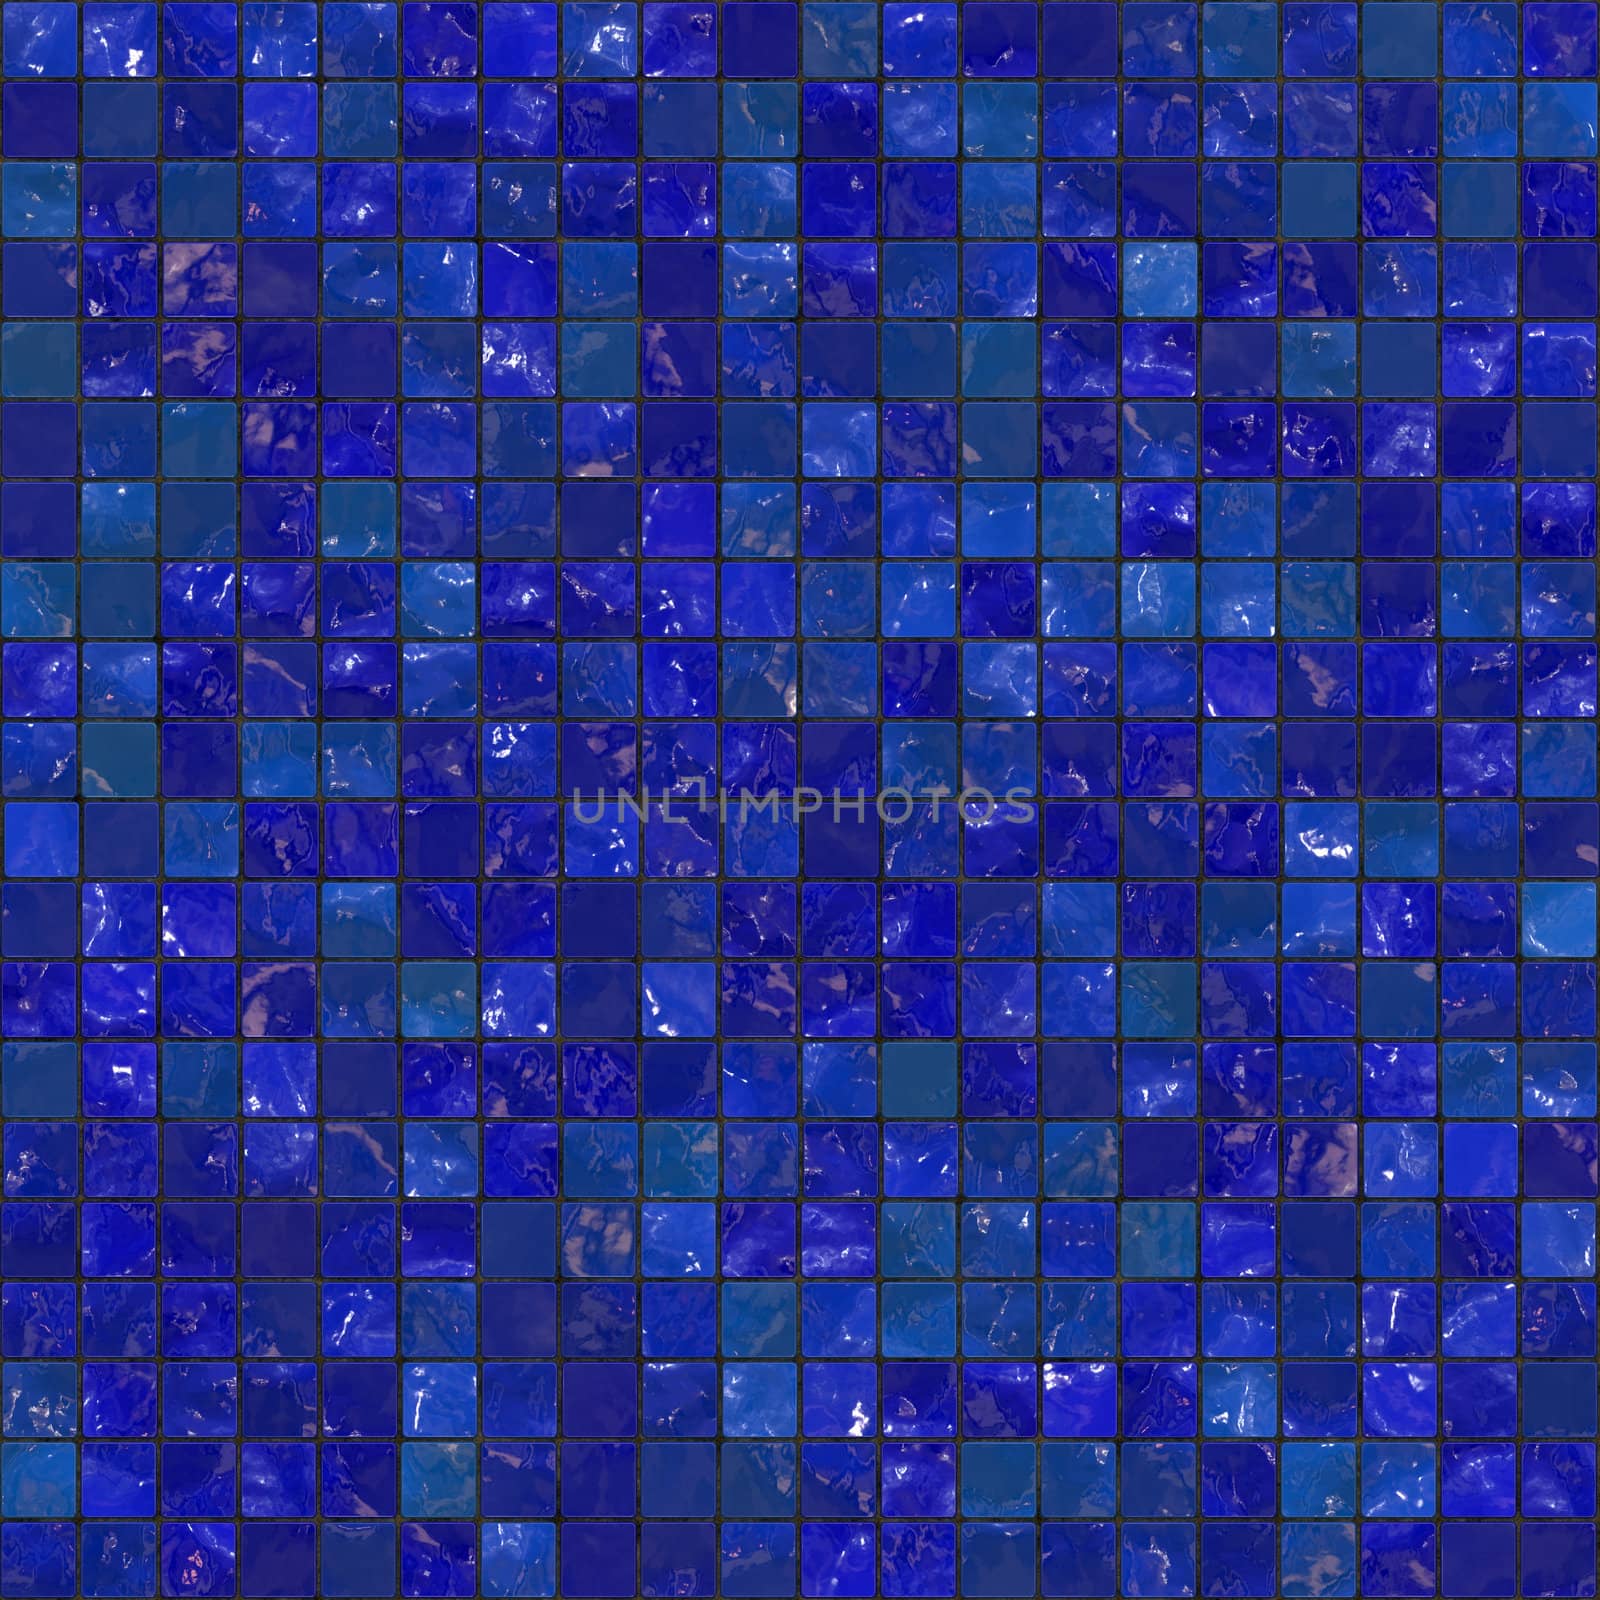 Blue bathroom tiles pattern that tile seamlessly as a pattern.